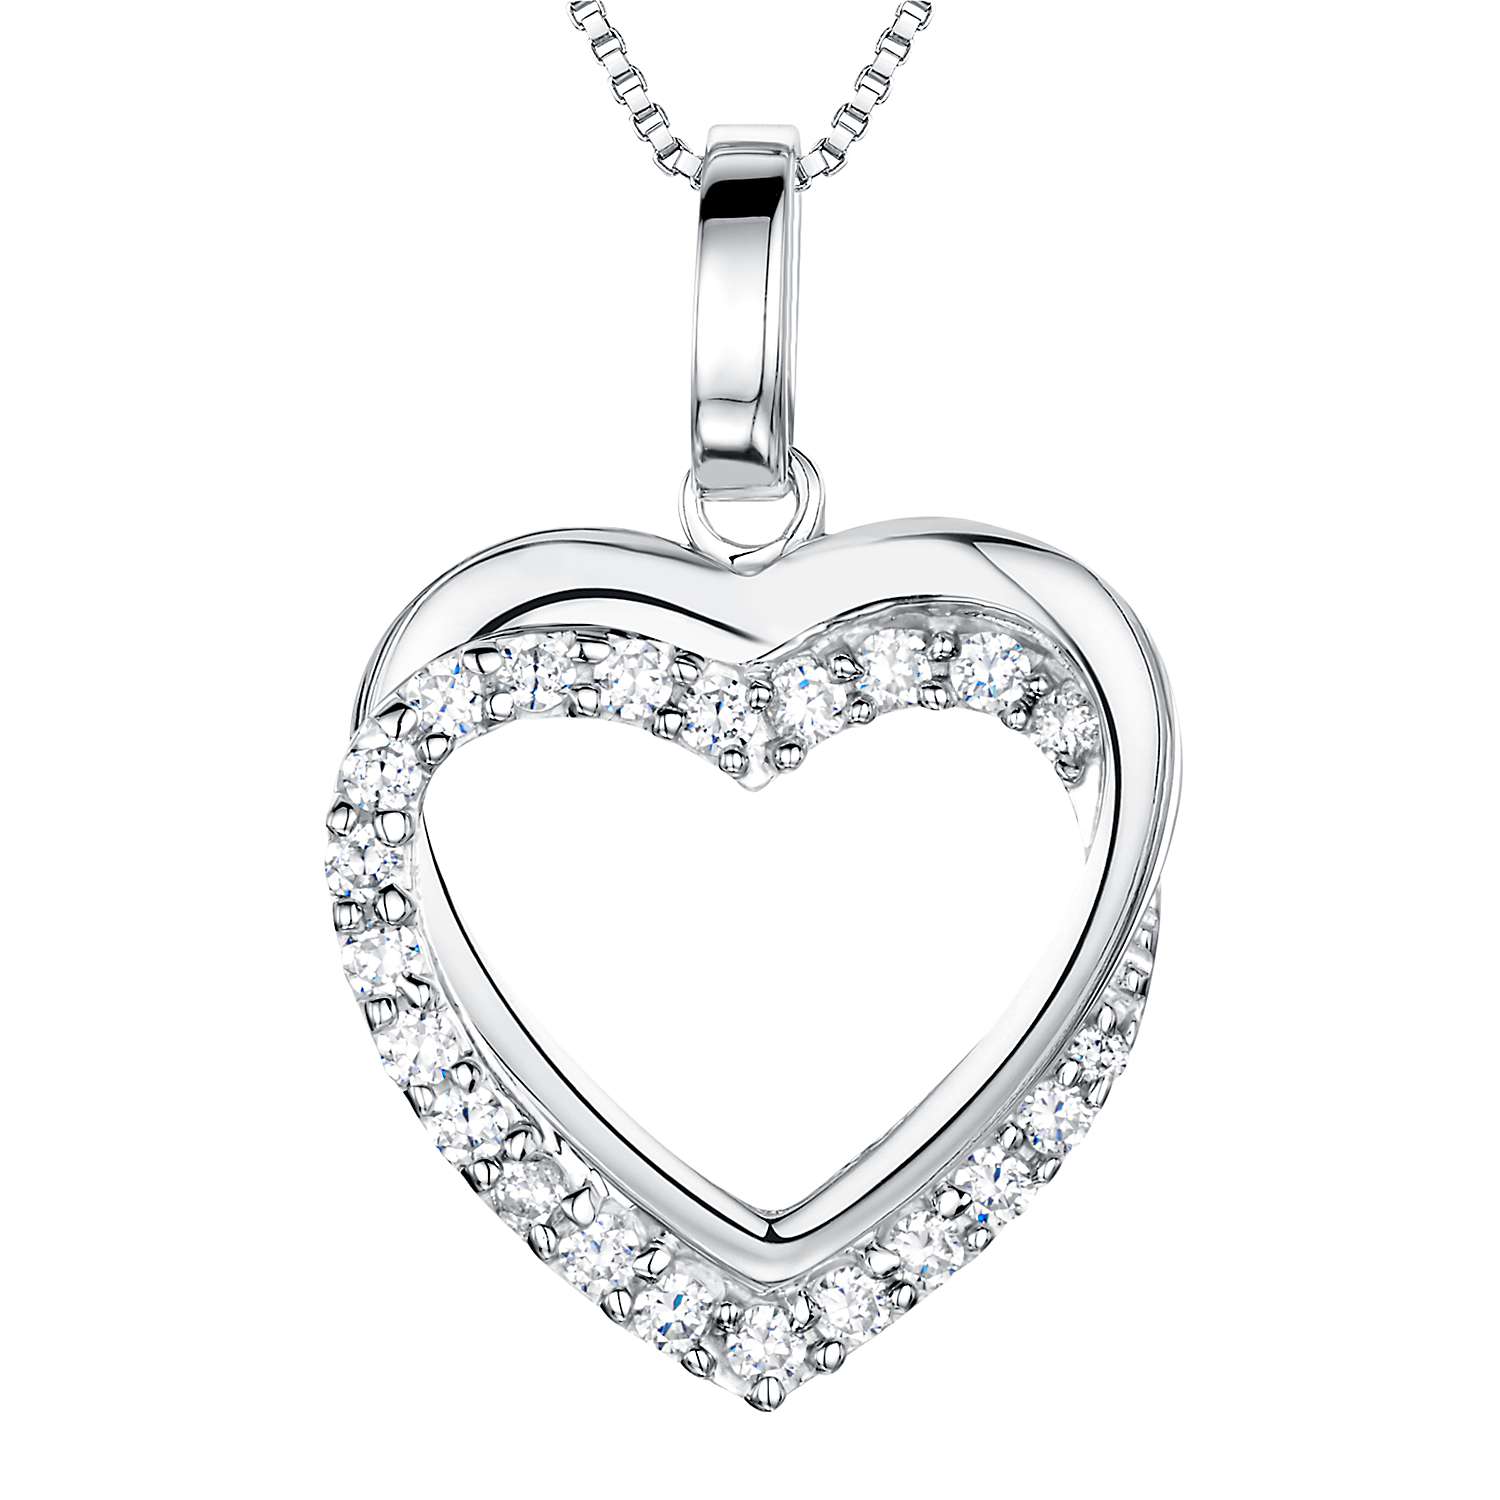 Buy Jools by Jenny Brown Sterling Silver Tangled Pave Heart Pendant, Rhodium Online at johnlewis.com